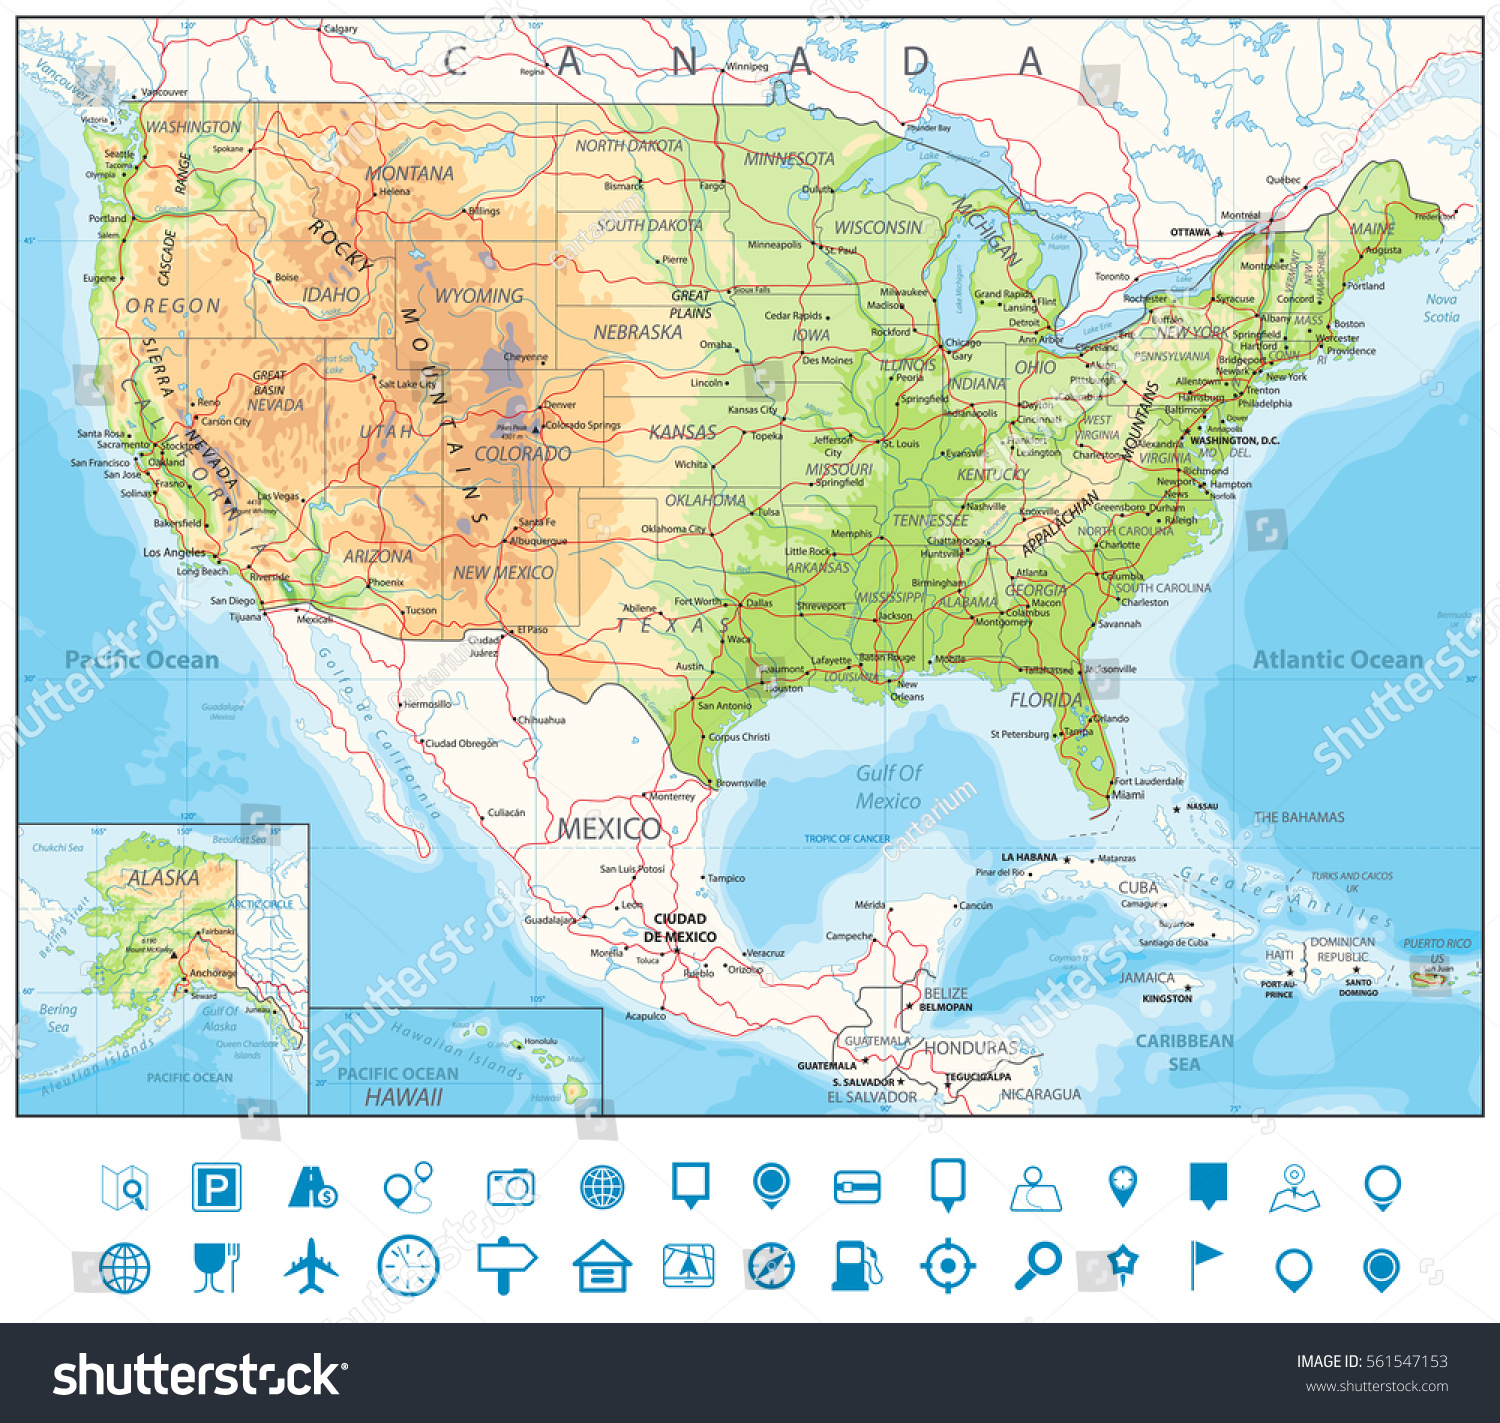 Road Physical Map Usa Roads Railroads Stock Vector Royalty Free